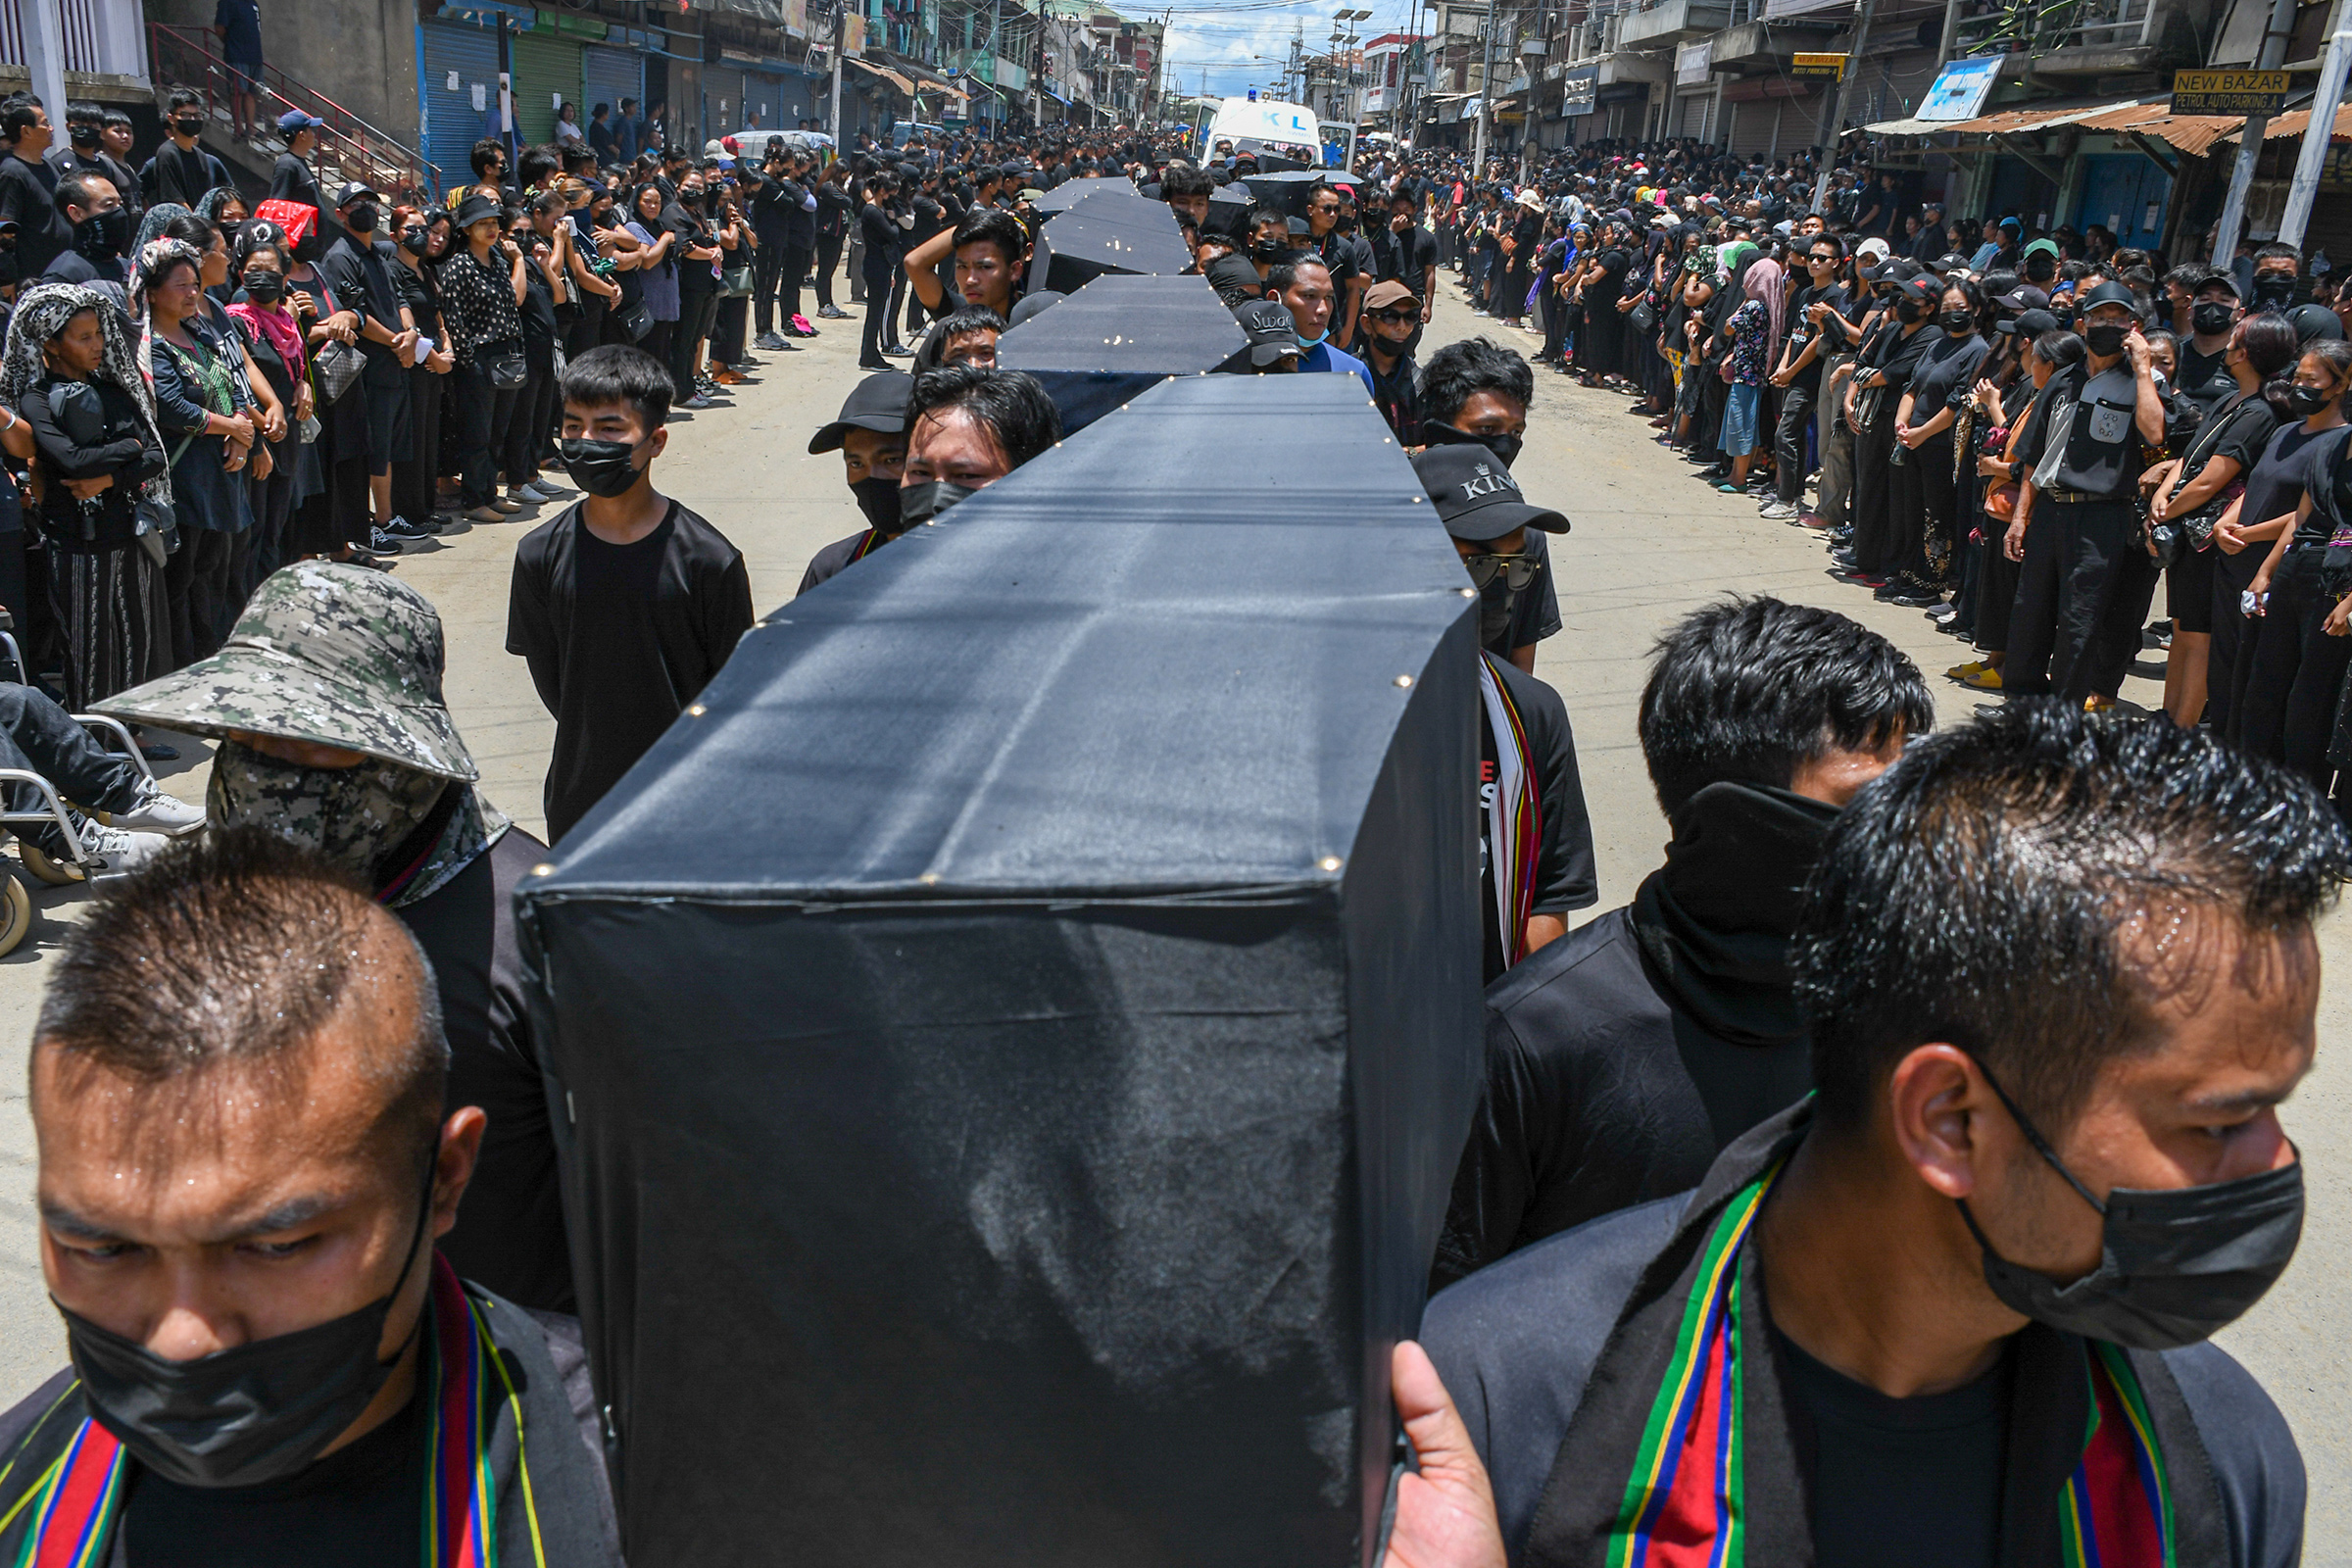 Residents of Churachandpur take part in a silent march while carrying dummy coffins to commemorate all the tribal people who lost their lives in the ethnic clashes in Manipur on June 23. (Biplov Bhuyan—SOPA Images/LightRocket/Getty Images)